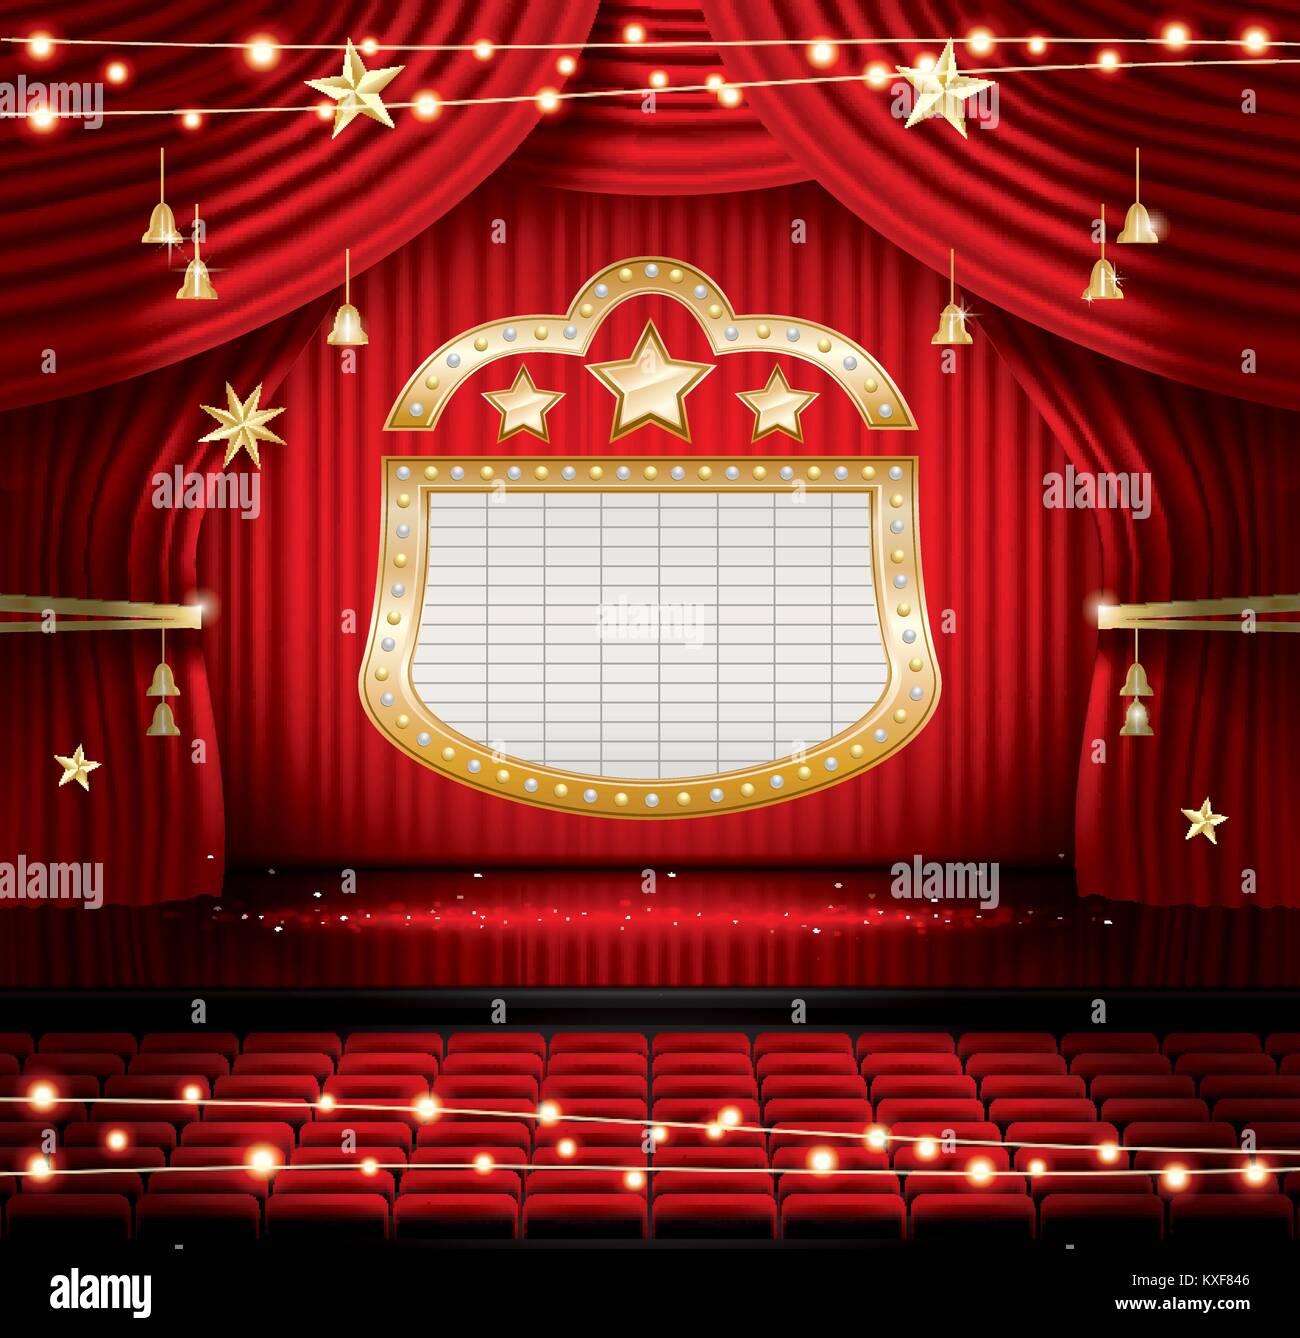 Red Stage Curtain with Seats and Spotlights. Vector illustration. Theater, Opera or Cinema Scene. Light on a Floor. Stock Vector